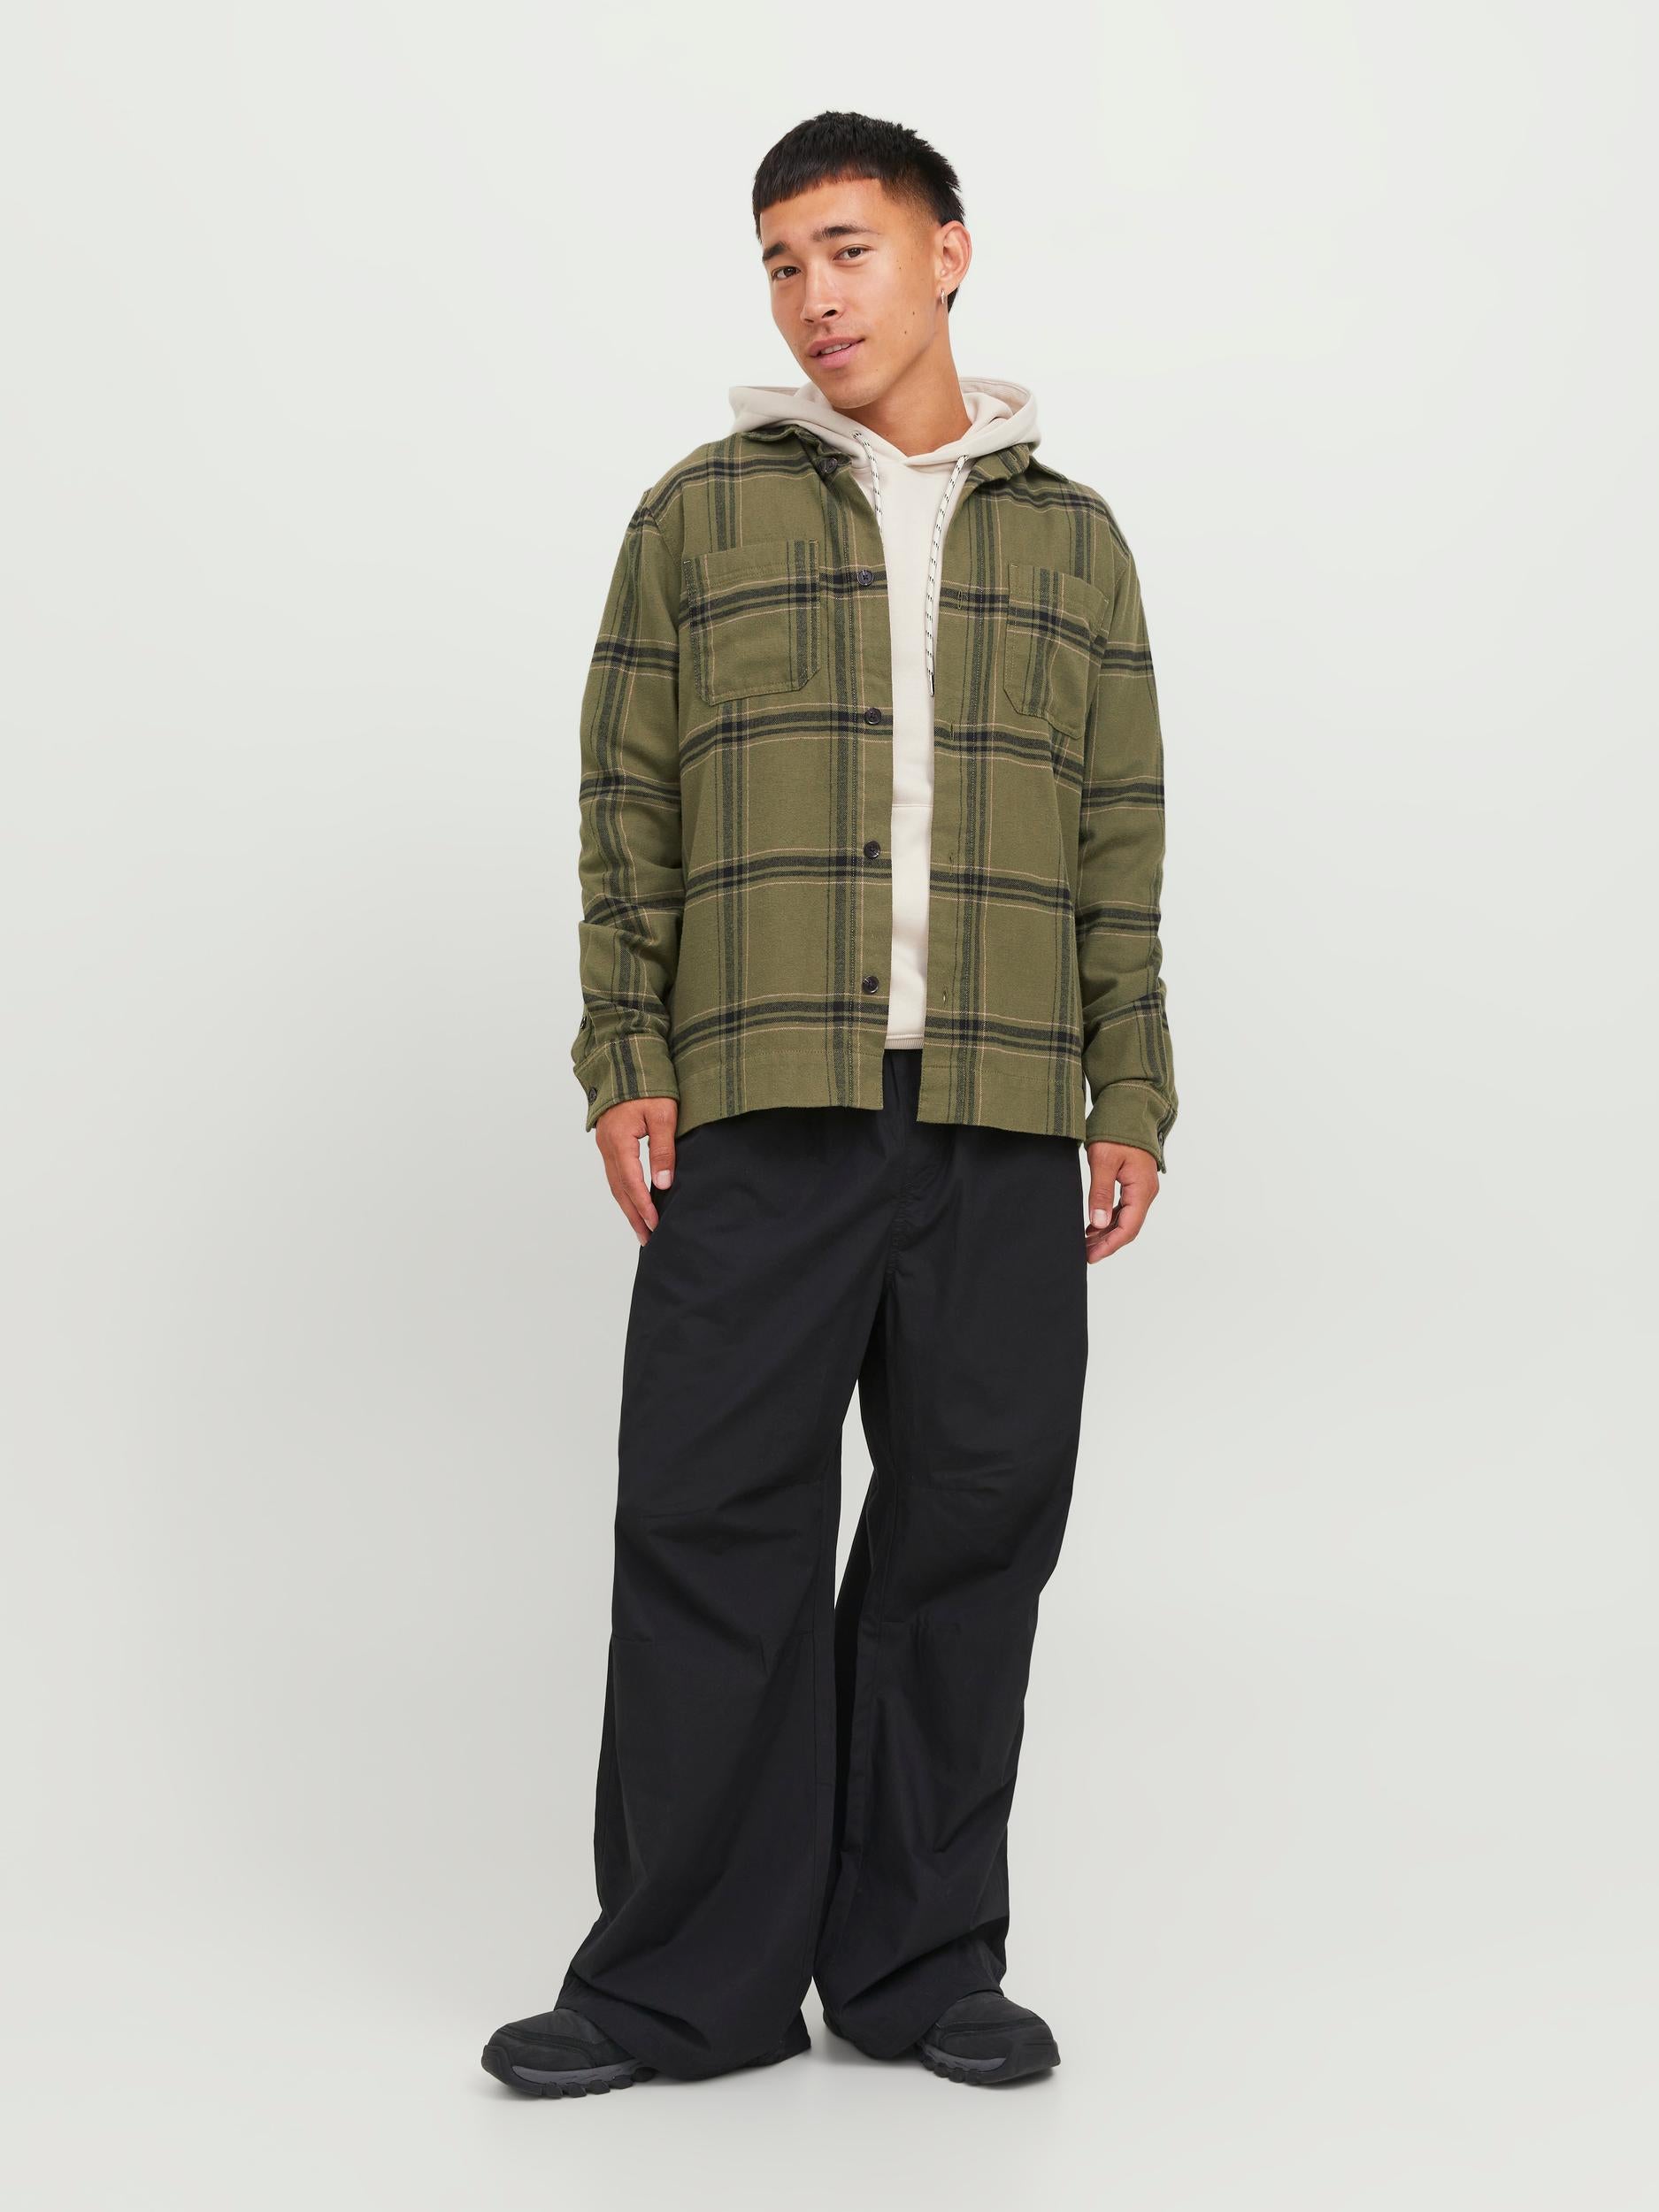 Space Logan Black Check Flannel Overshirt-Full model view